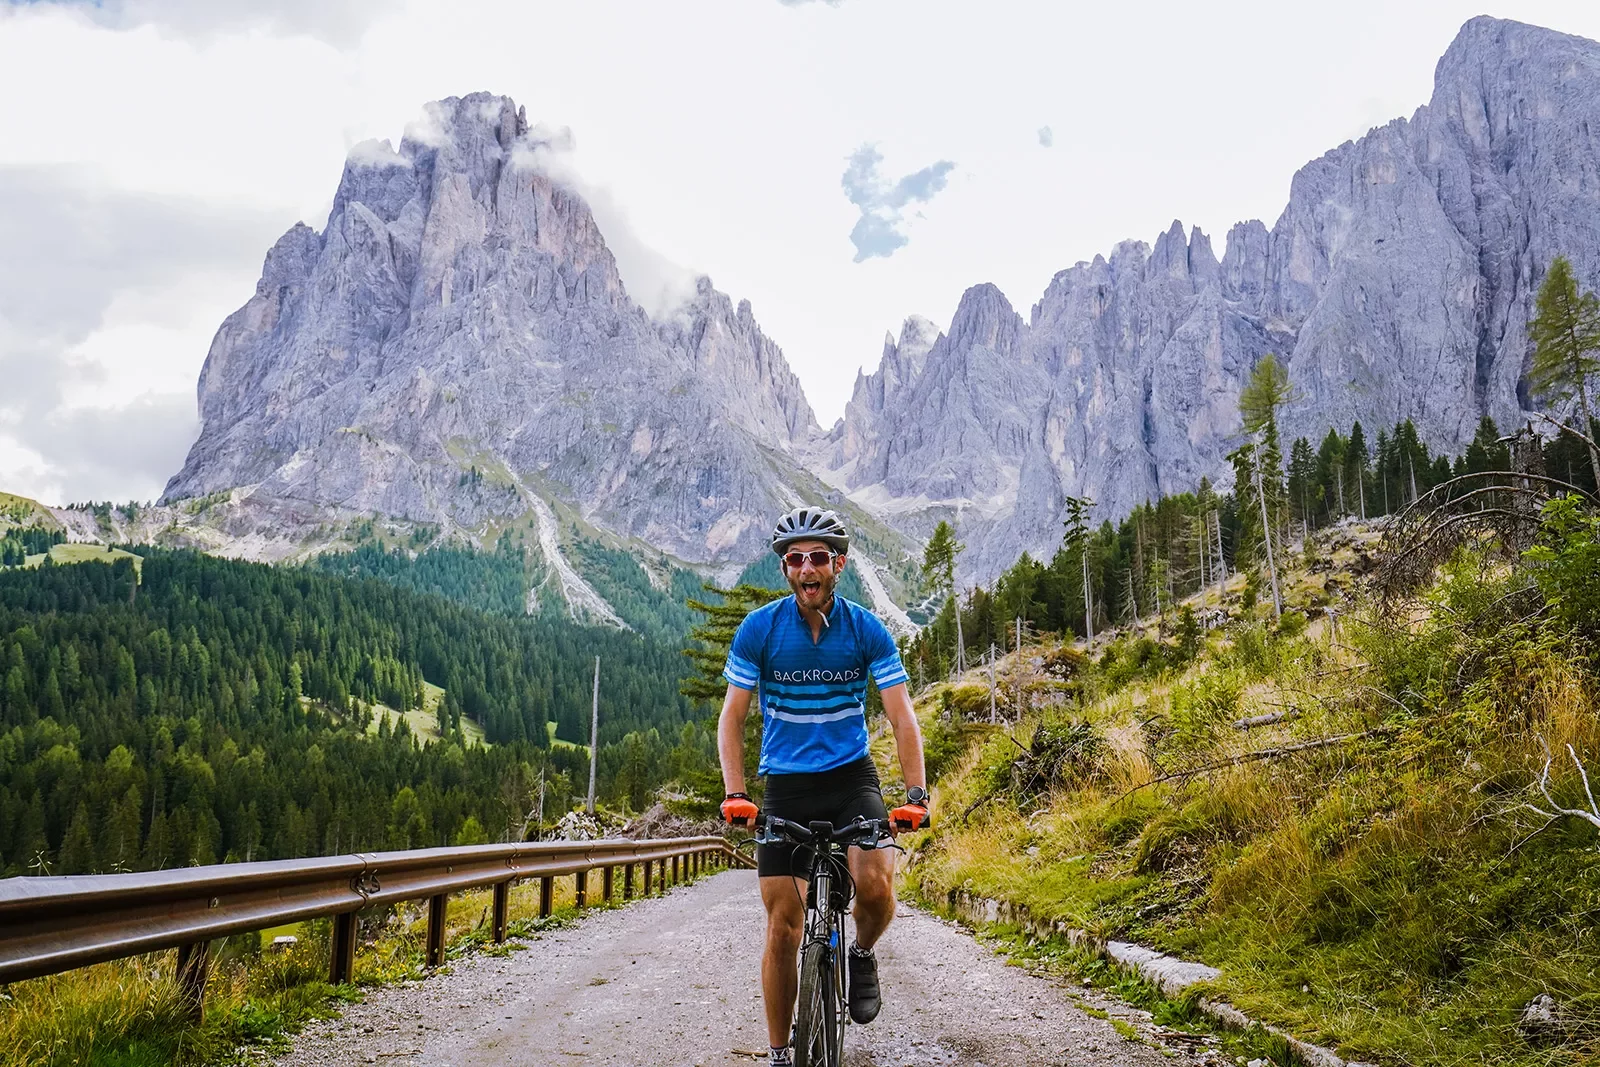 Guest cycling directly towards camera, large, craggy mountains in background.